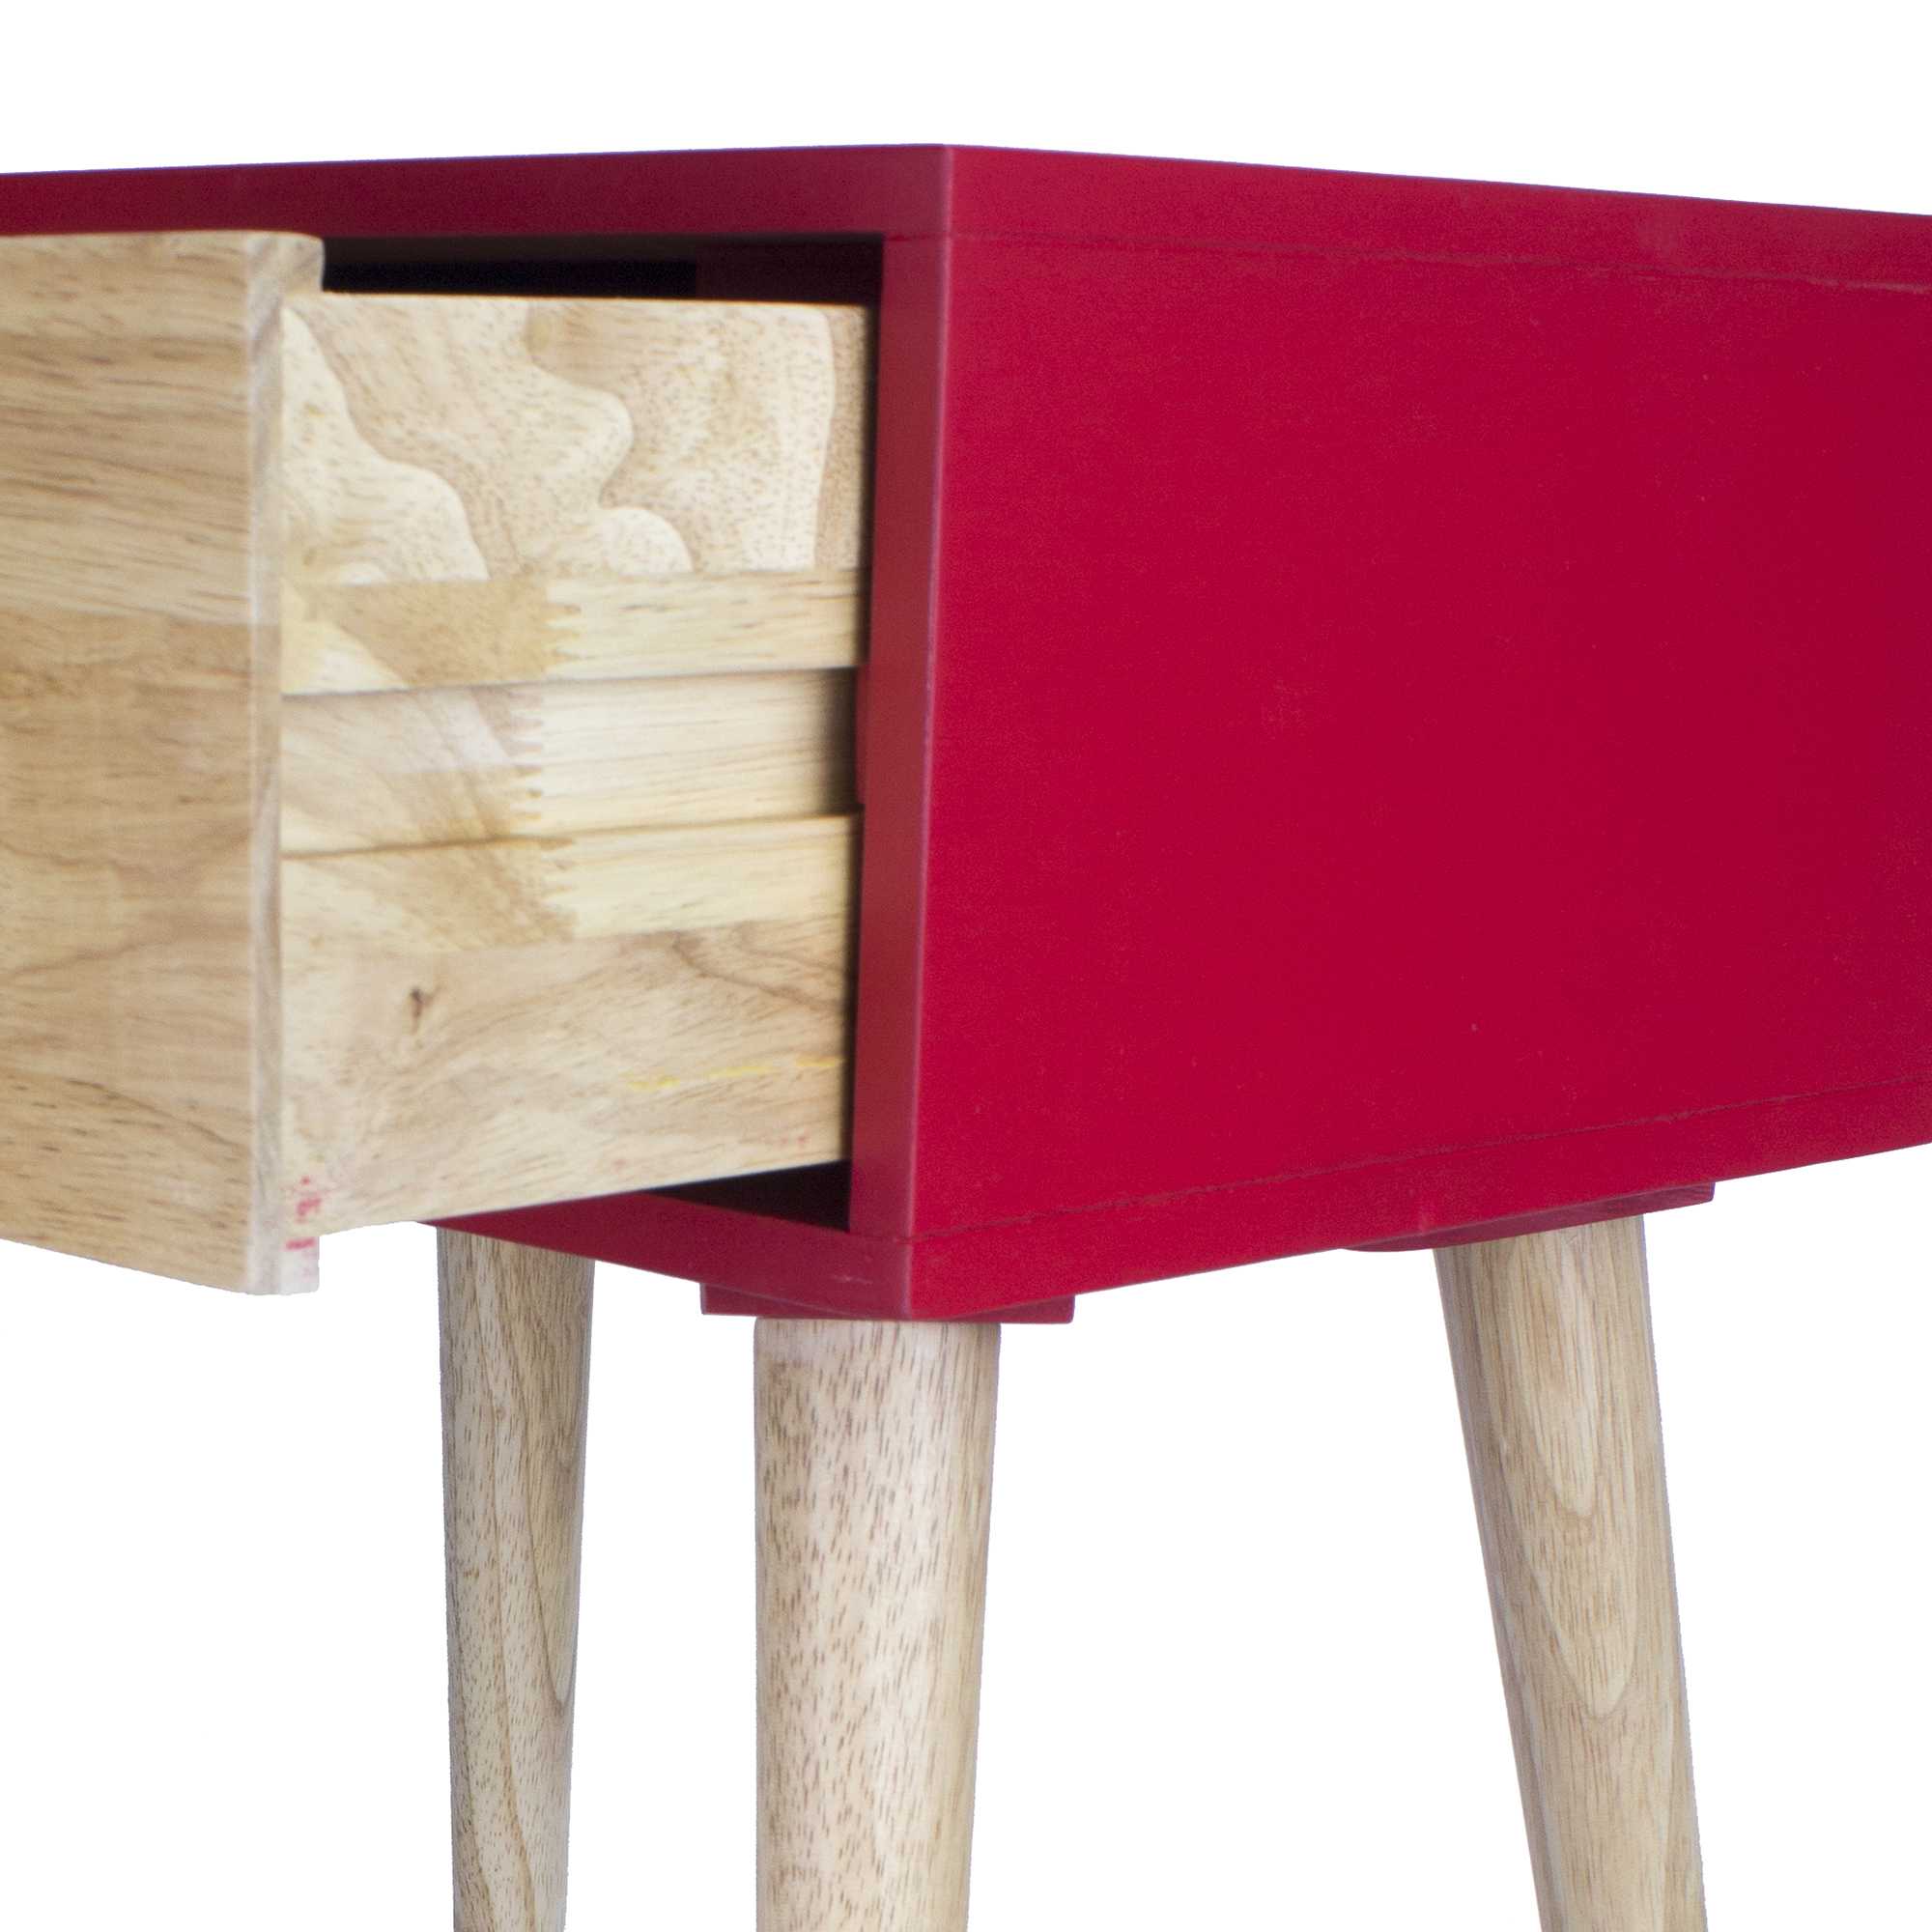 16" X 12" X 24" Red MDF Wood End Table with Drawer